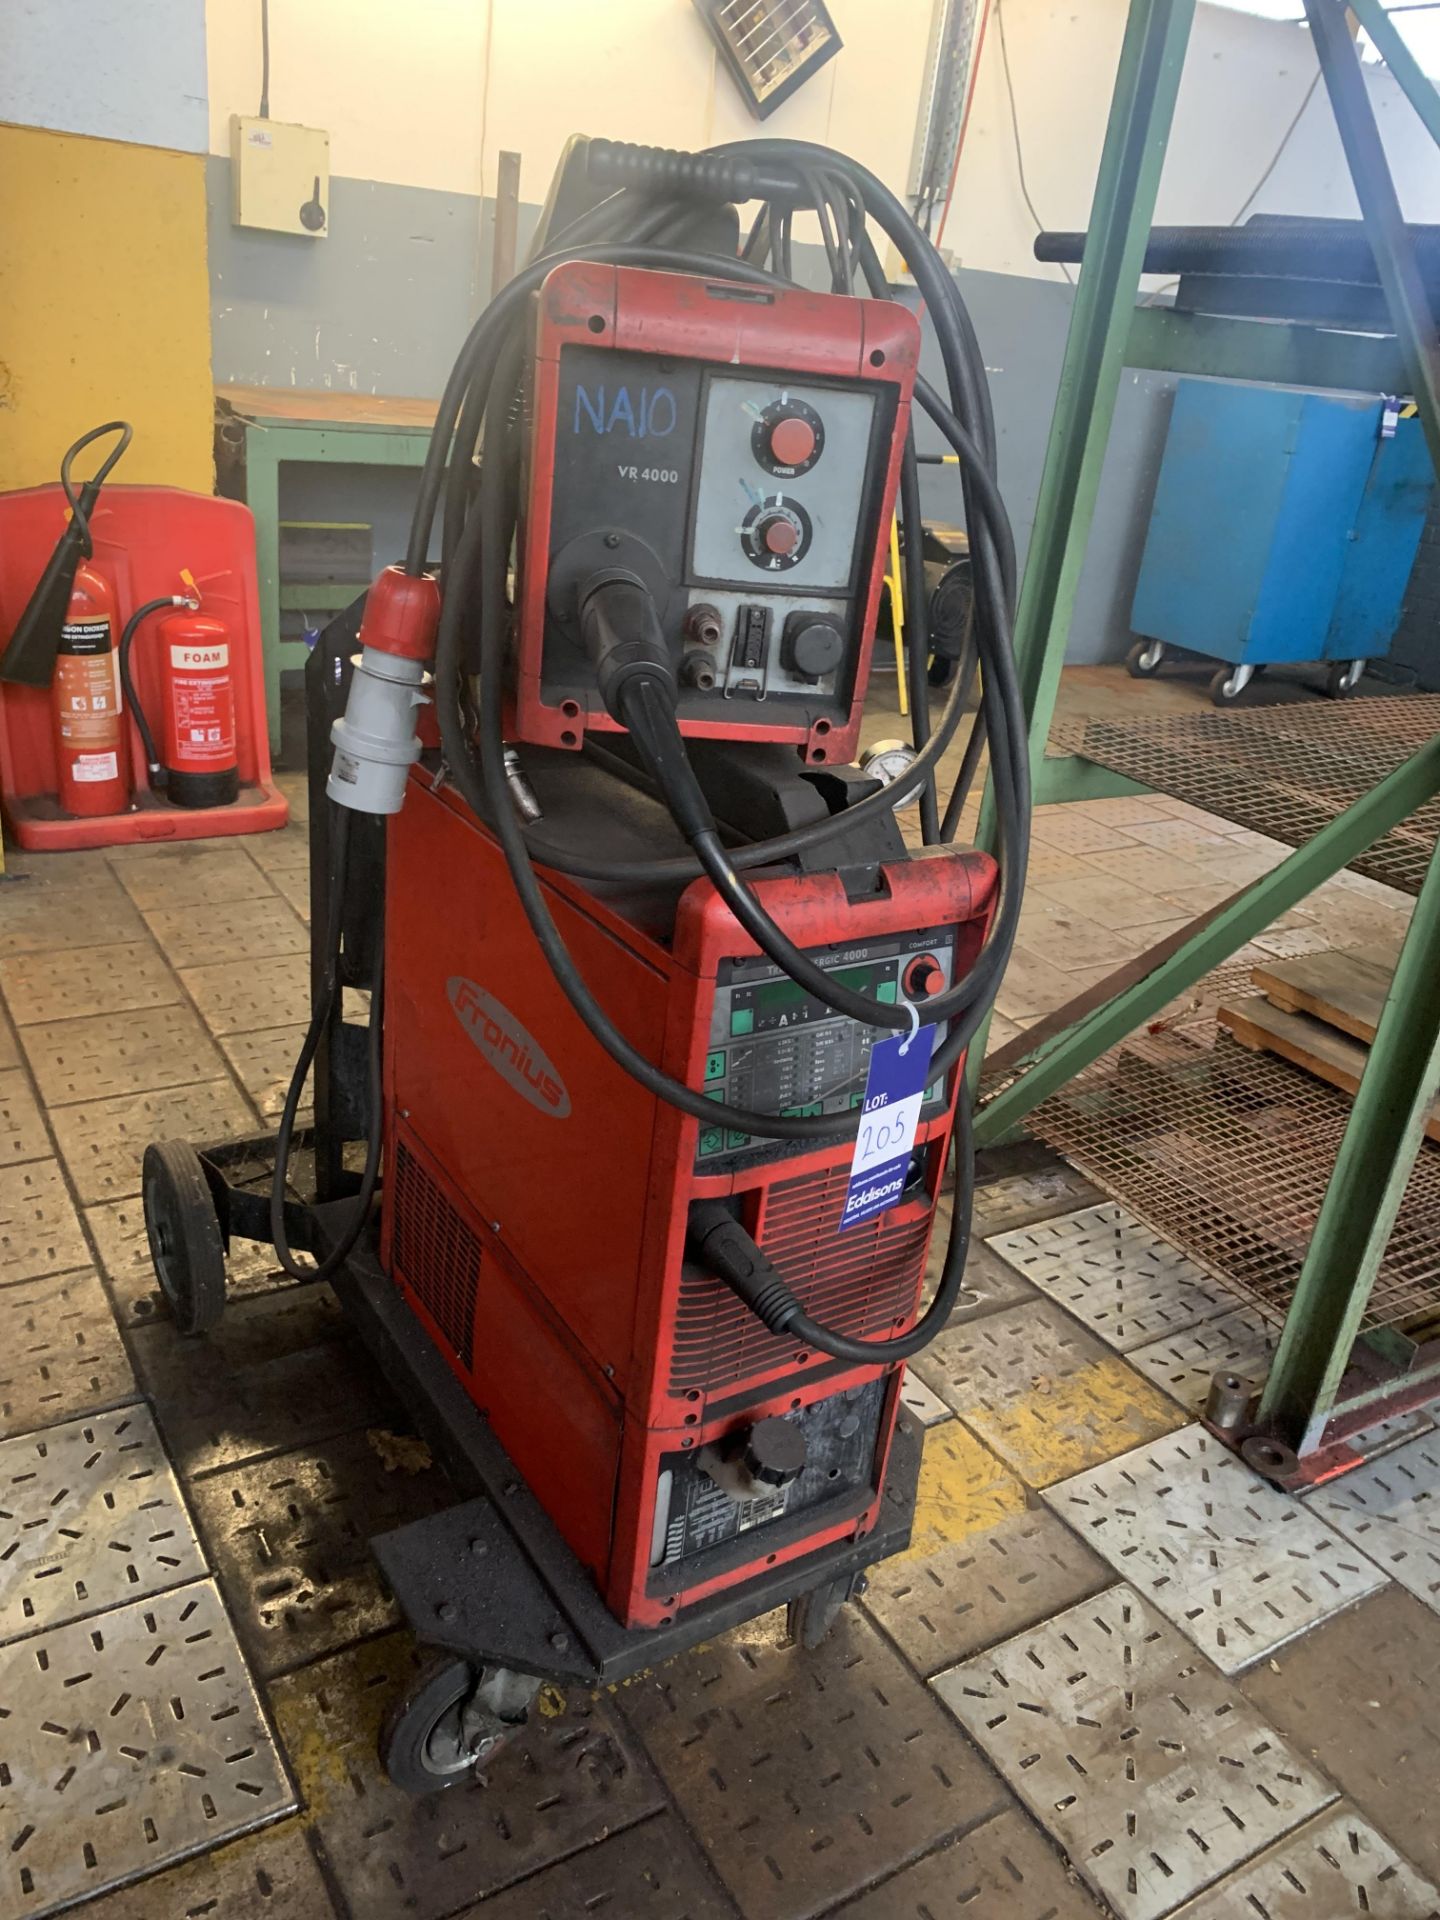 Fronius Transyergic 4000 Mig Welder with VR 4000 Wire Feed. - Image 2 of 5